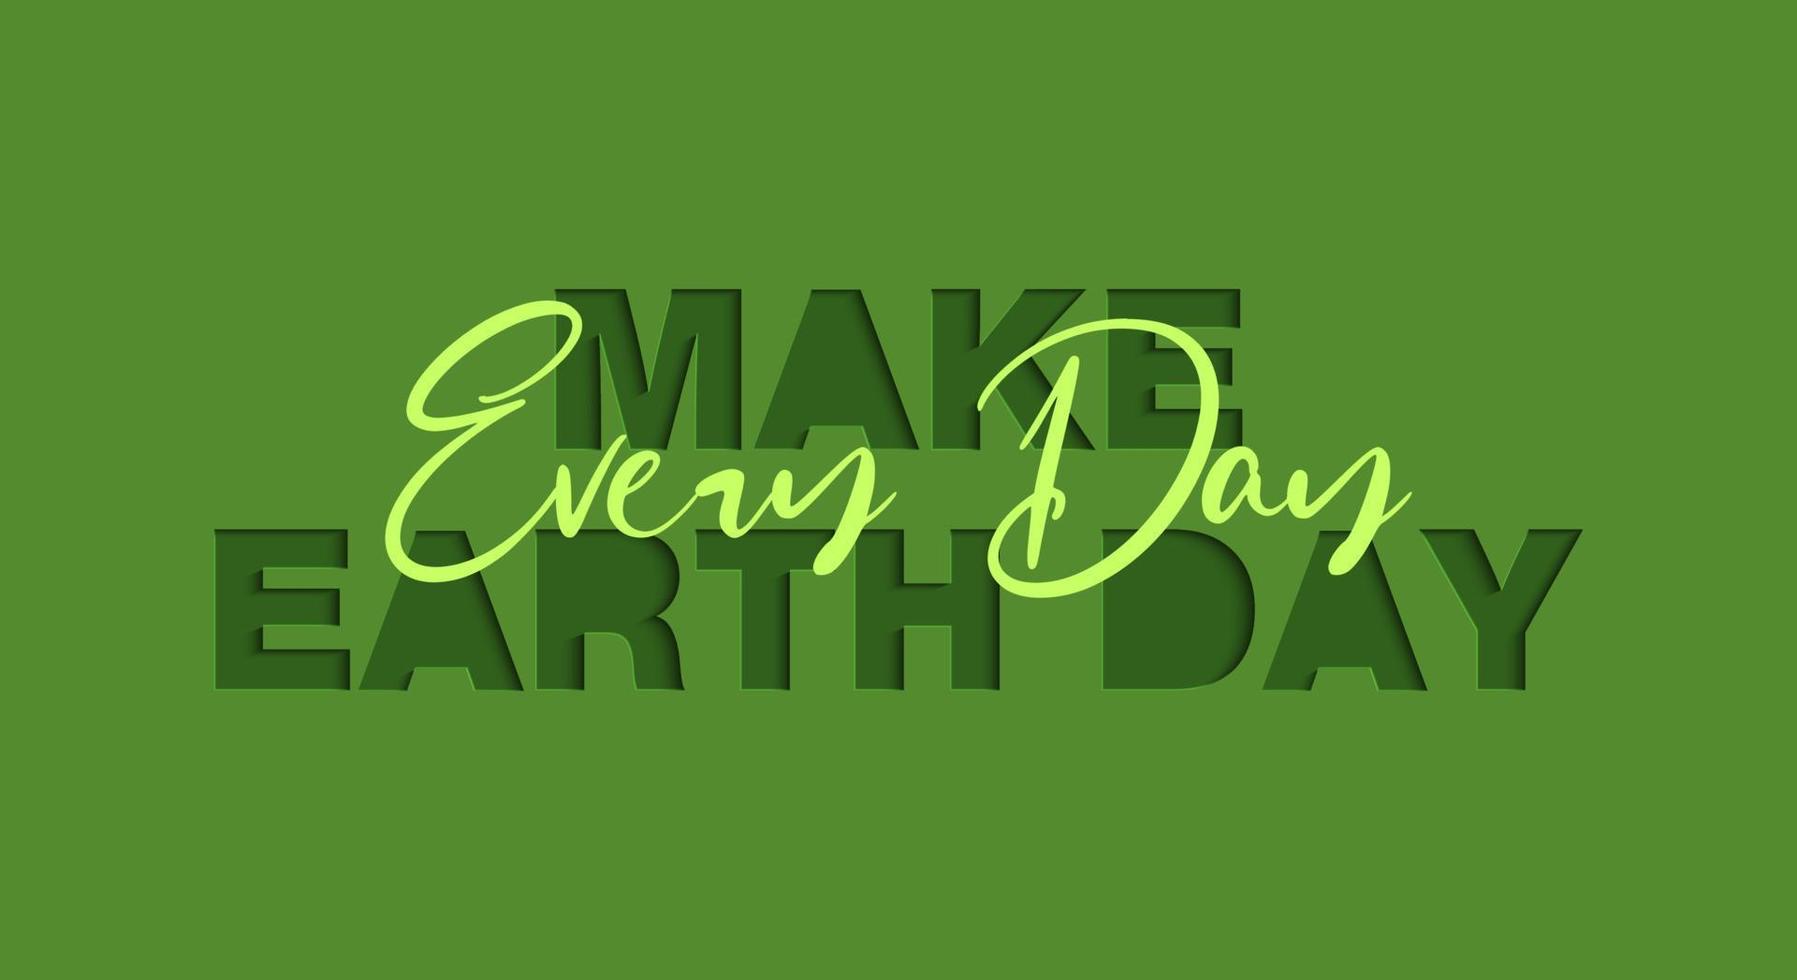 Vector paper cut with words for poster, advertising, banner, site decoration, offer, promo, flyer, brochure, social media posts. Craft cut out style on green background. Make every day Earth day.